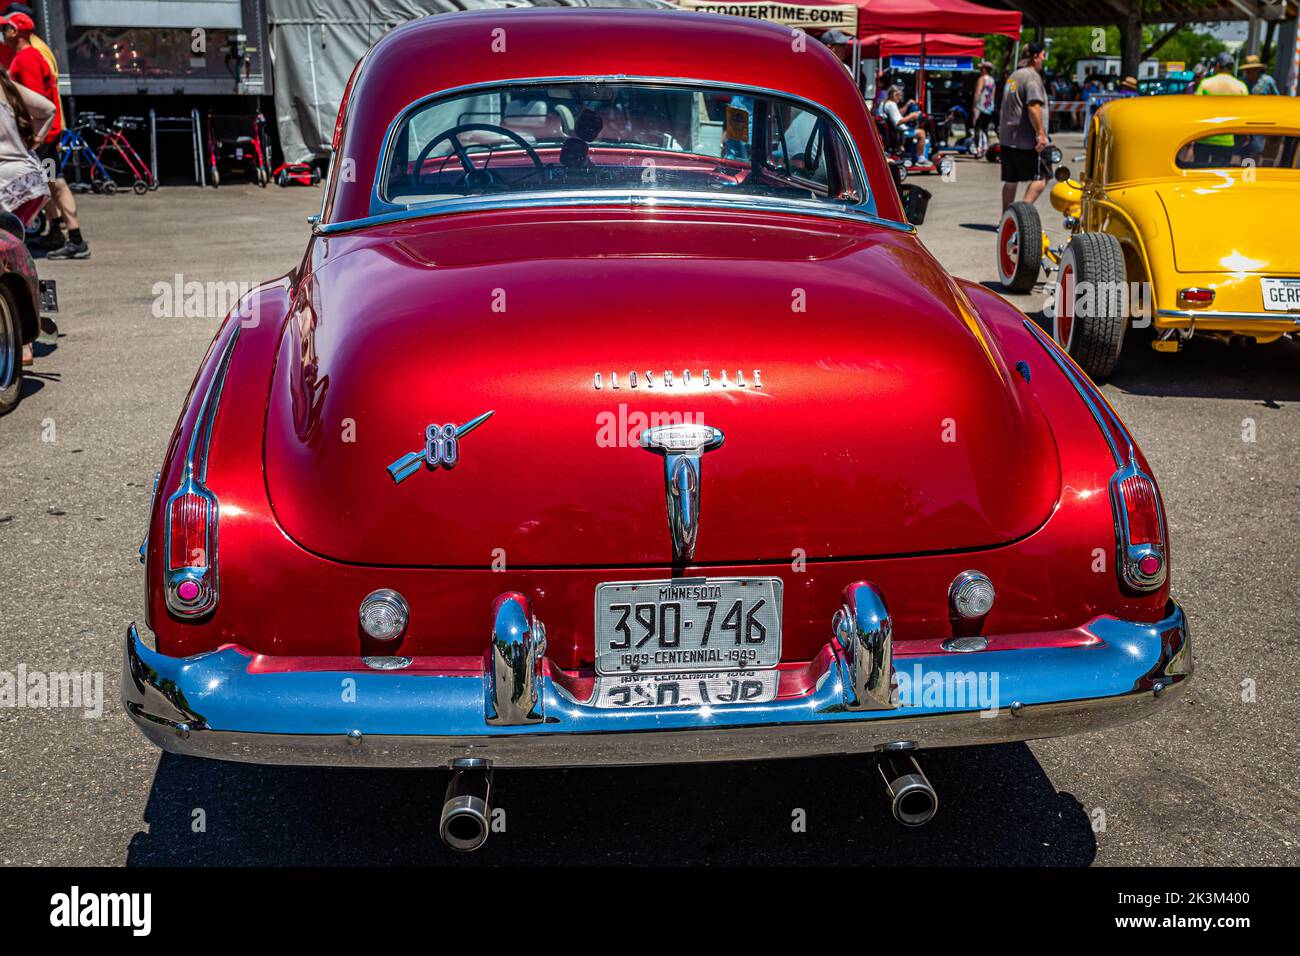 Falcon Heights, MN - June 18, 2022: High perspective rear view of a 1949 Oldsmobile Rocket 88 Coupe at a local car show. Stock Photo